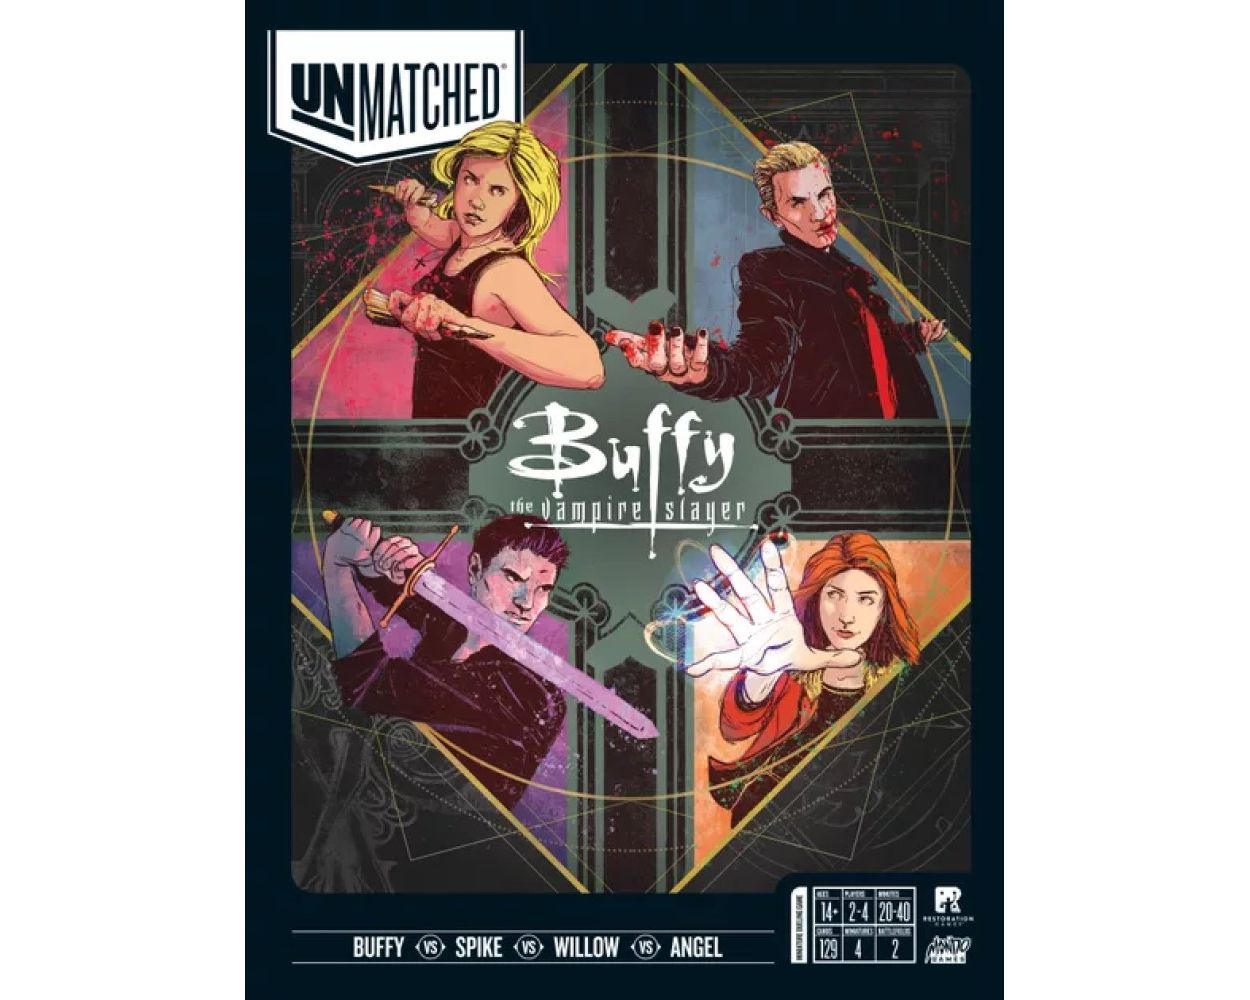 Unmatched: Buffy The Vampire Slayer